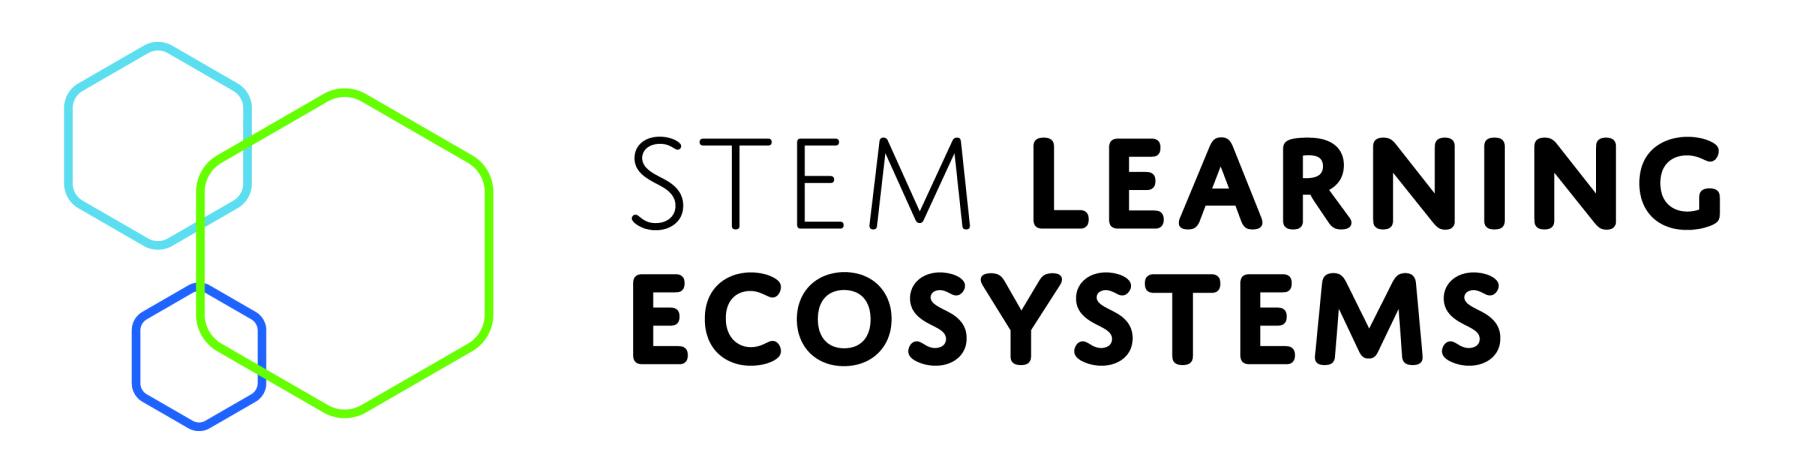 STEM Learning ecosystems horizontal color logo